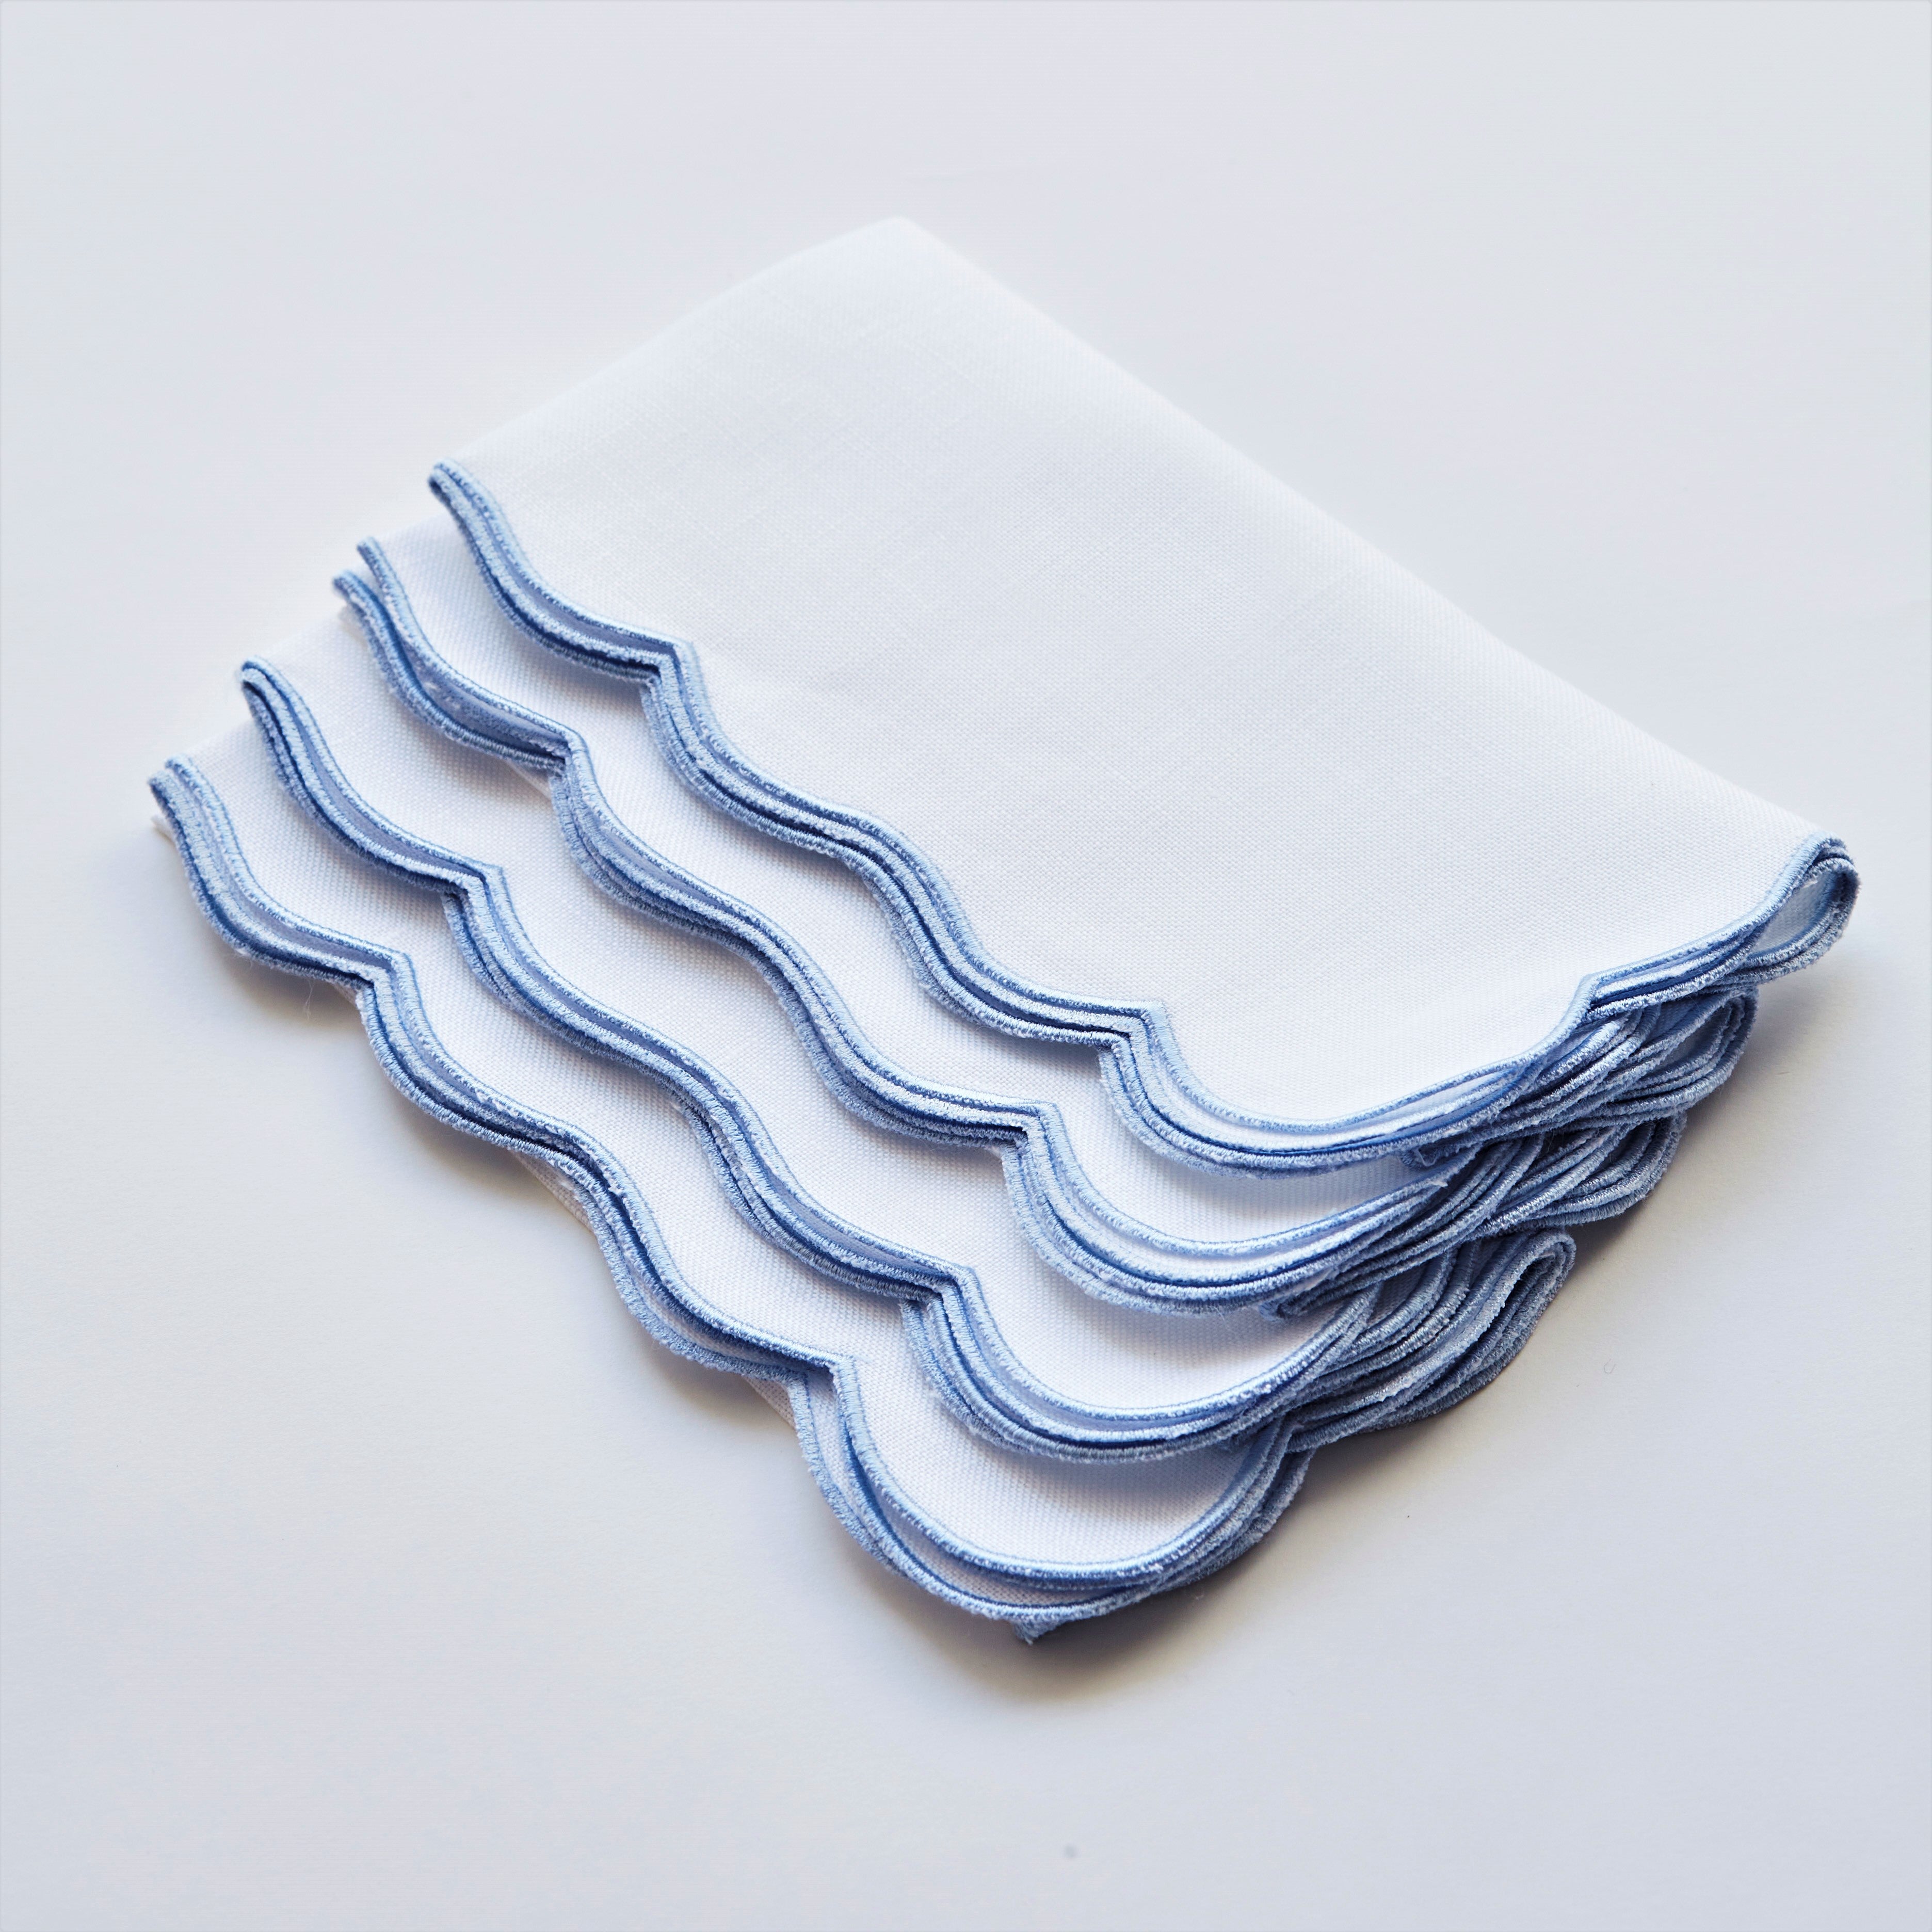 Embroidered Light Blue Scallop Napkin (set of 4)